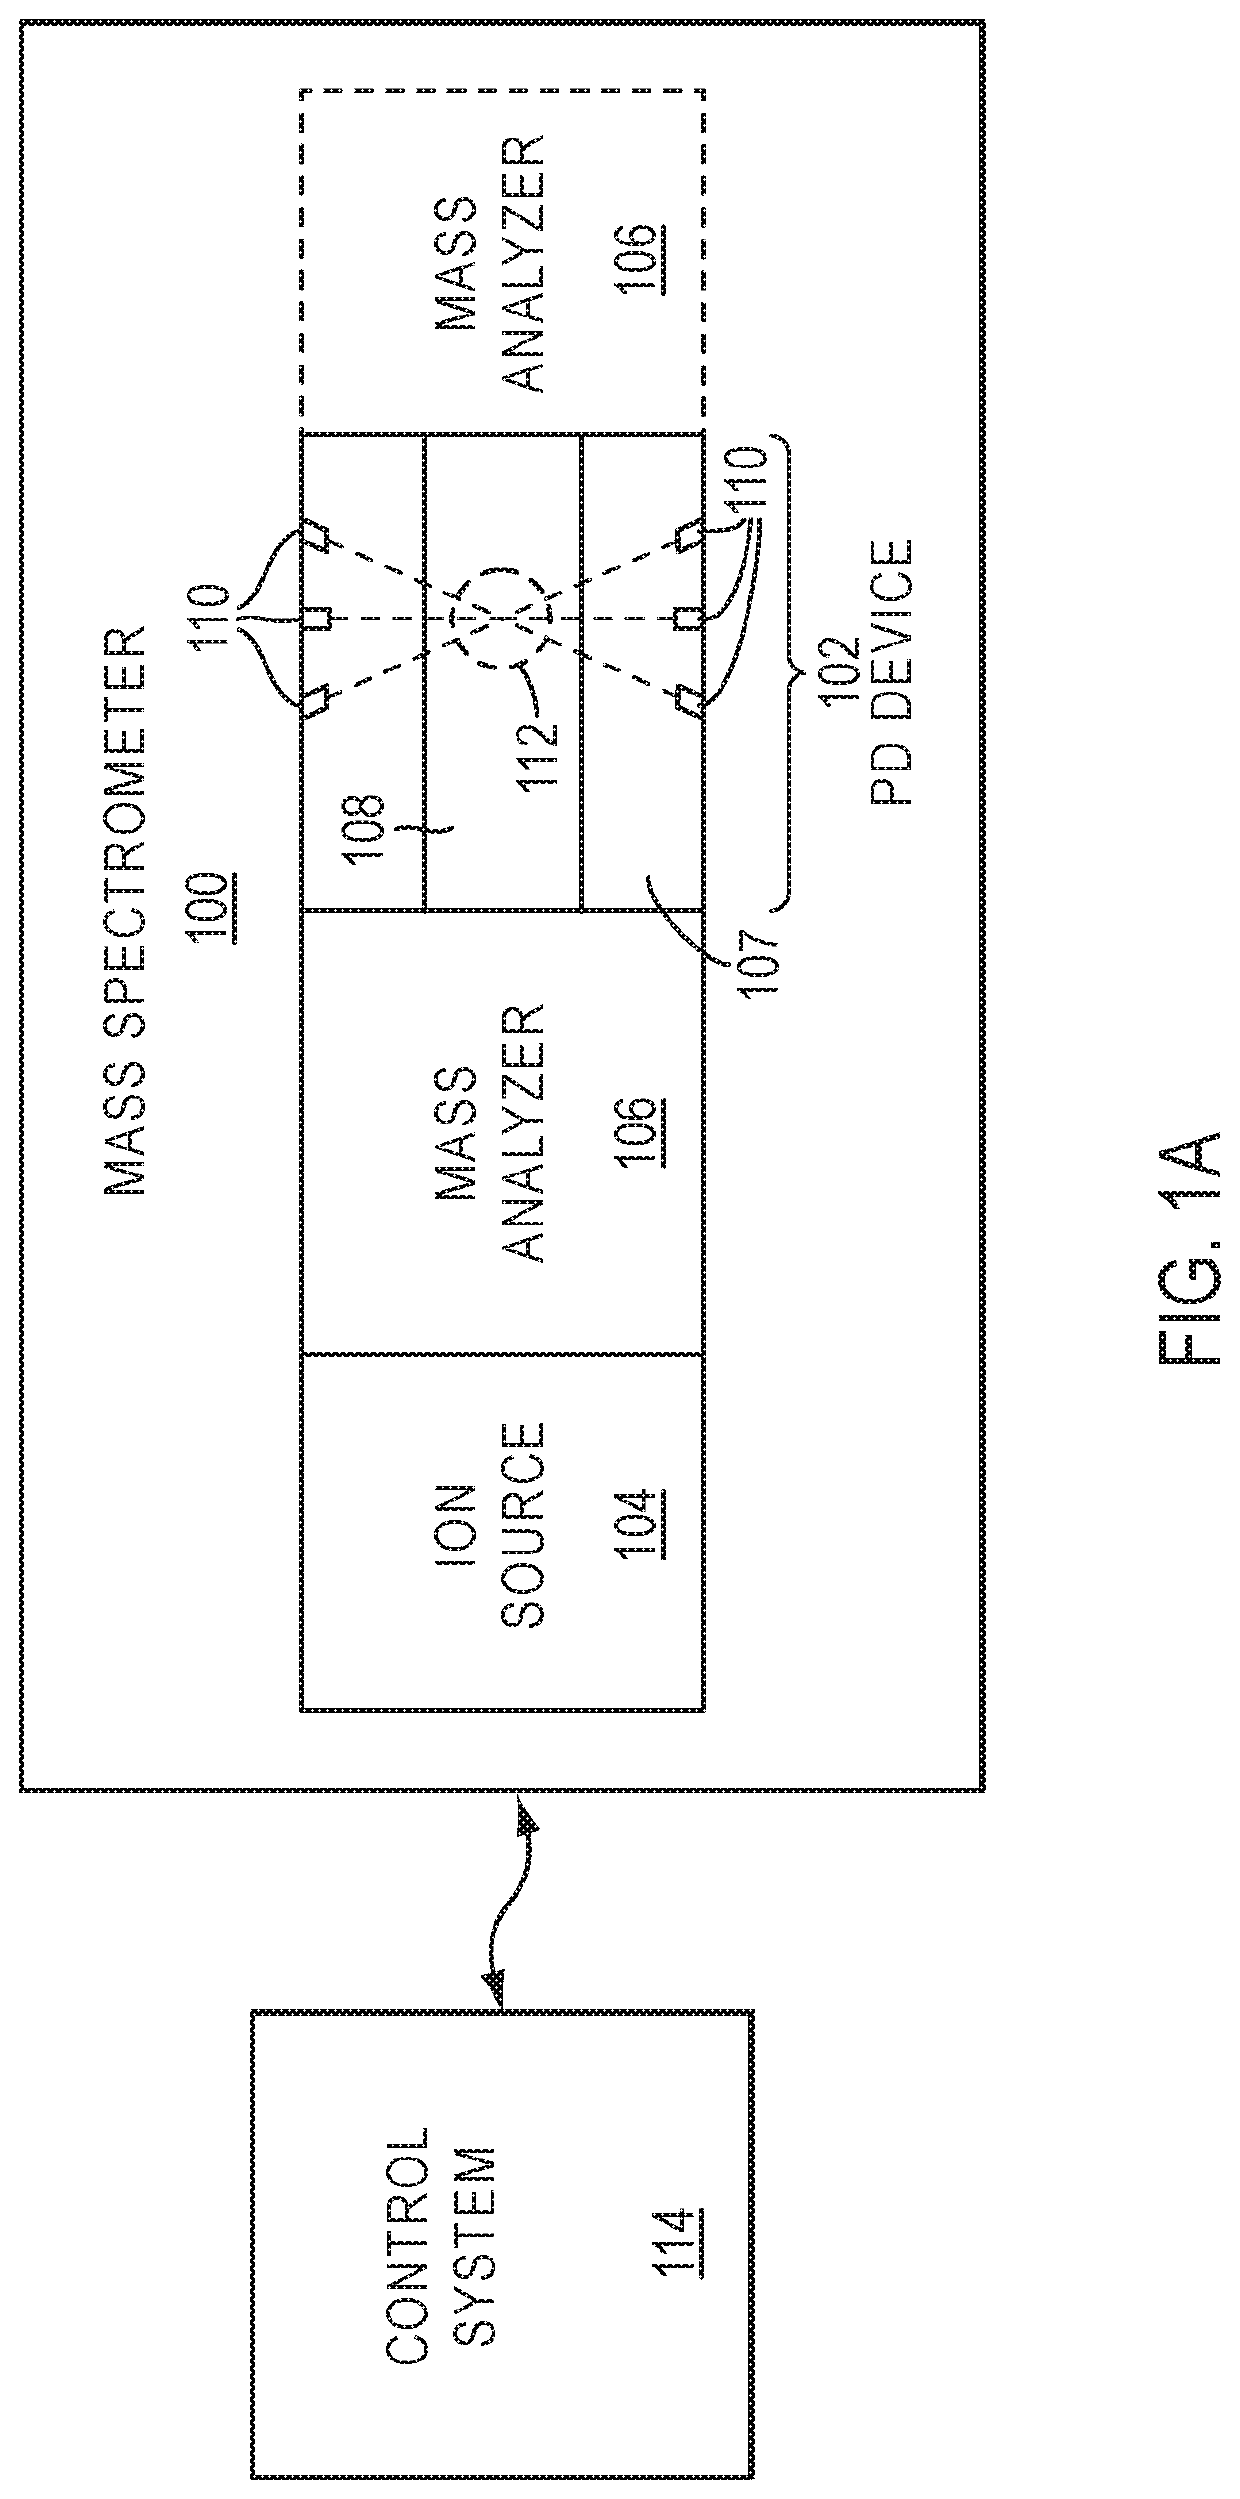 Devices, systems, and methods for dissociation of ions using light emitting diodes